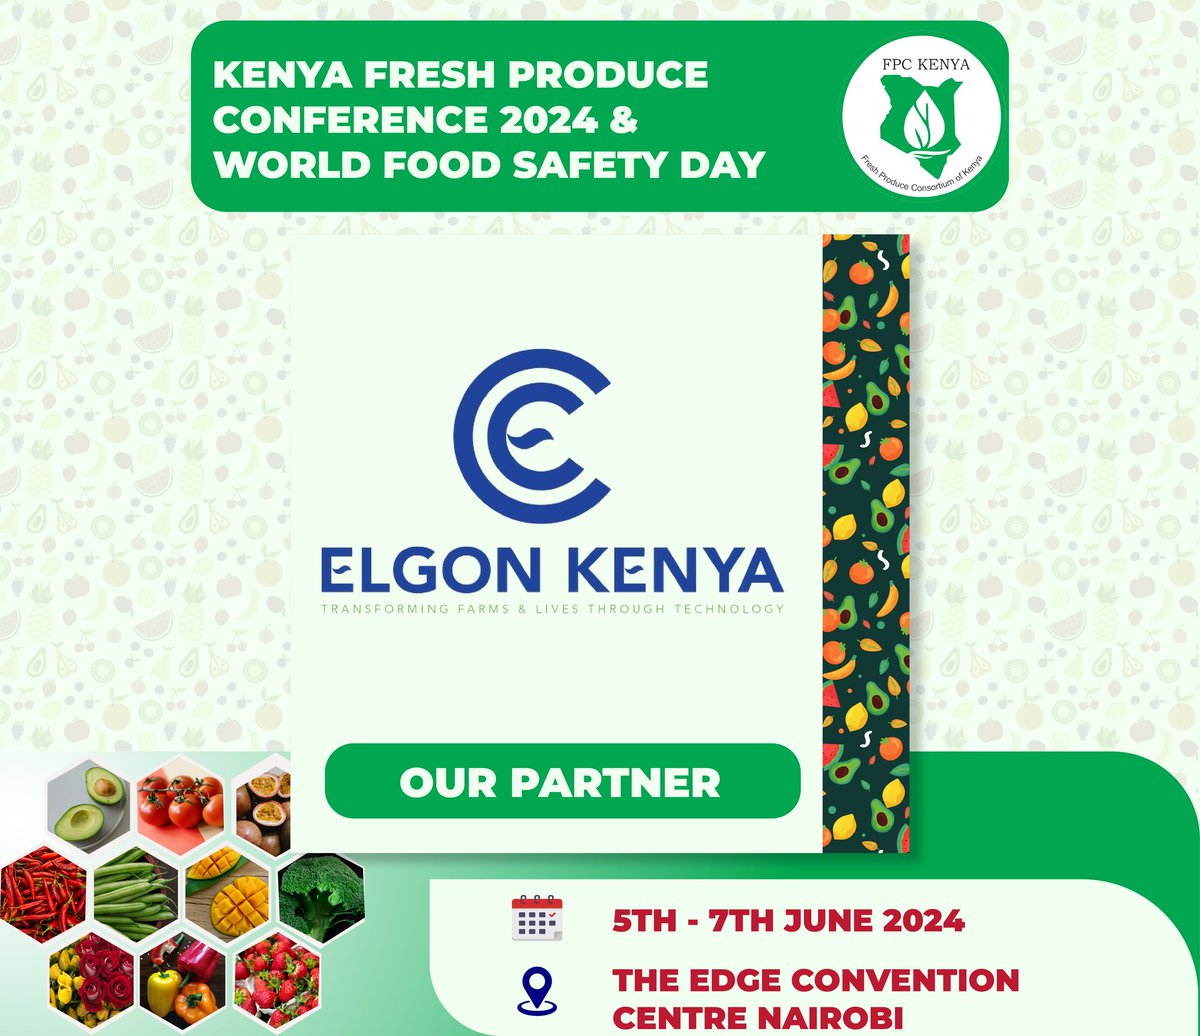 We are honored to welcome @ElgonKenyaLtd on board as our esteemed Partner for the upcoming Kenya Fresh Produce Conference 2024 & World Food Safety Day. #freshproduce #conference2024 #avocado